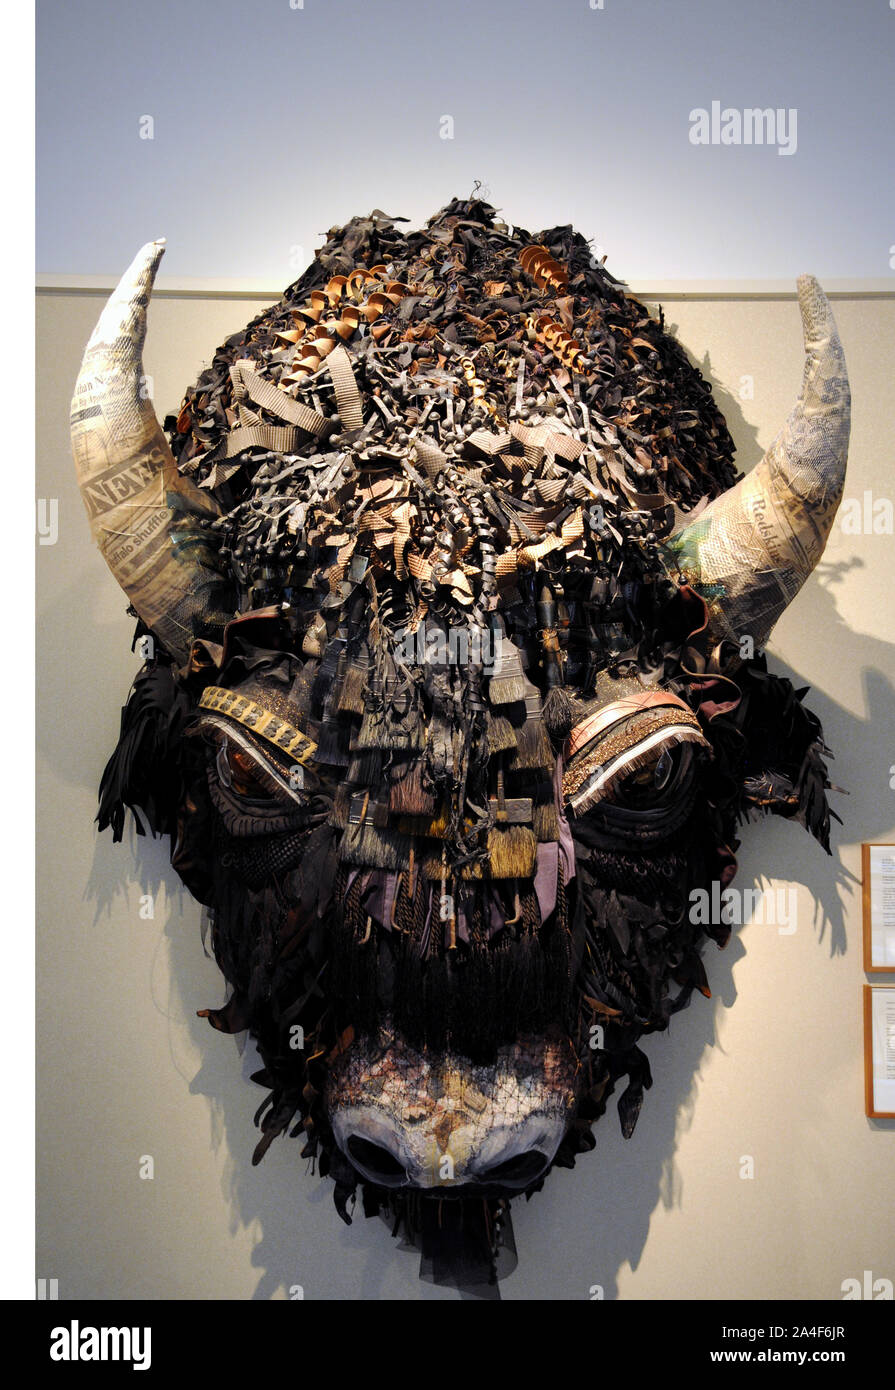 A mixed media three dimensional art work entitled 'Buffalo' by Holly Hughes on display in the Capitol Building Santa Fe, New Mexico. Stock Photo